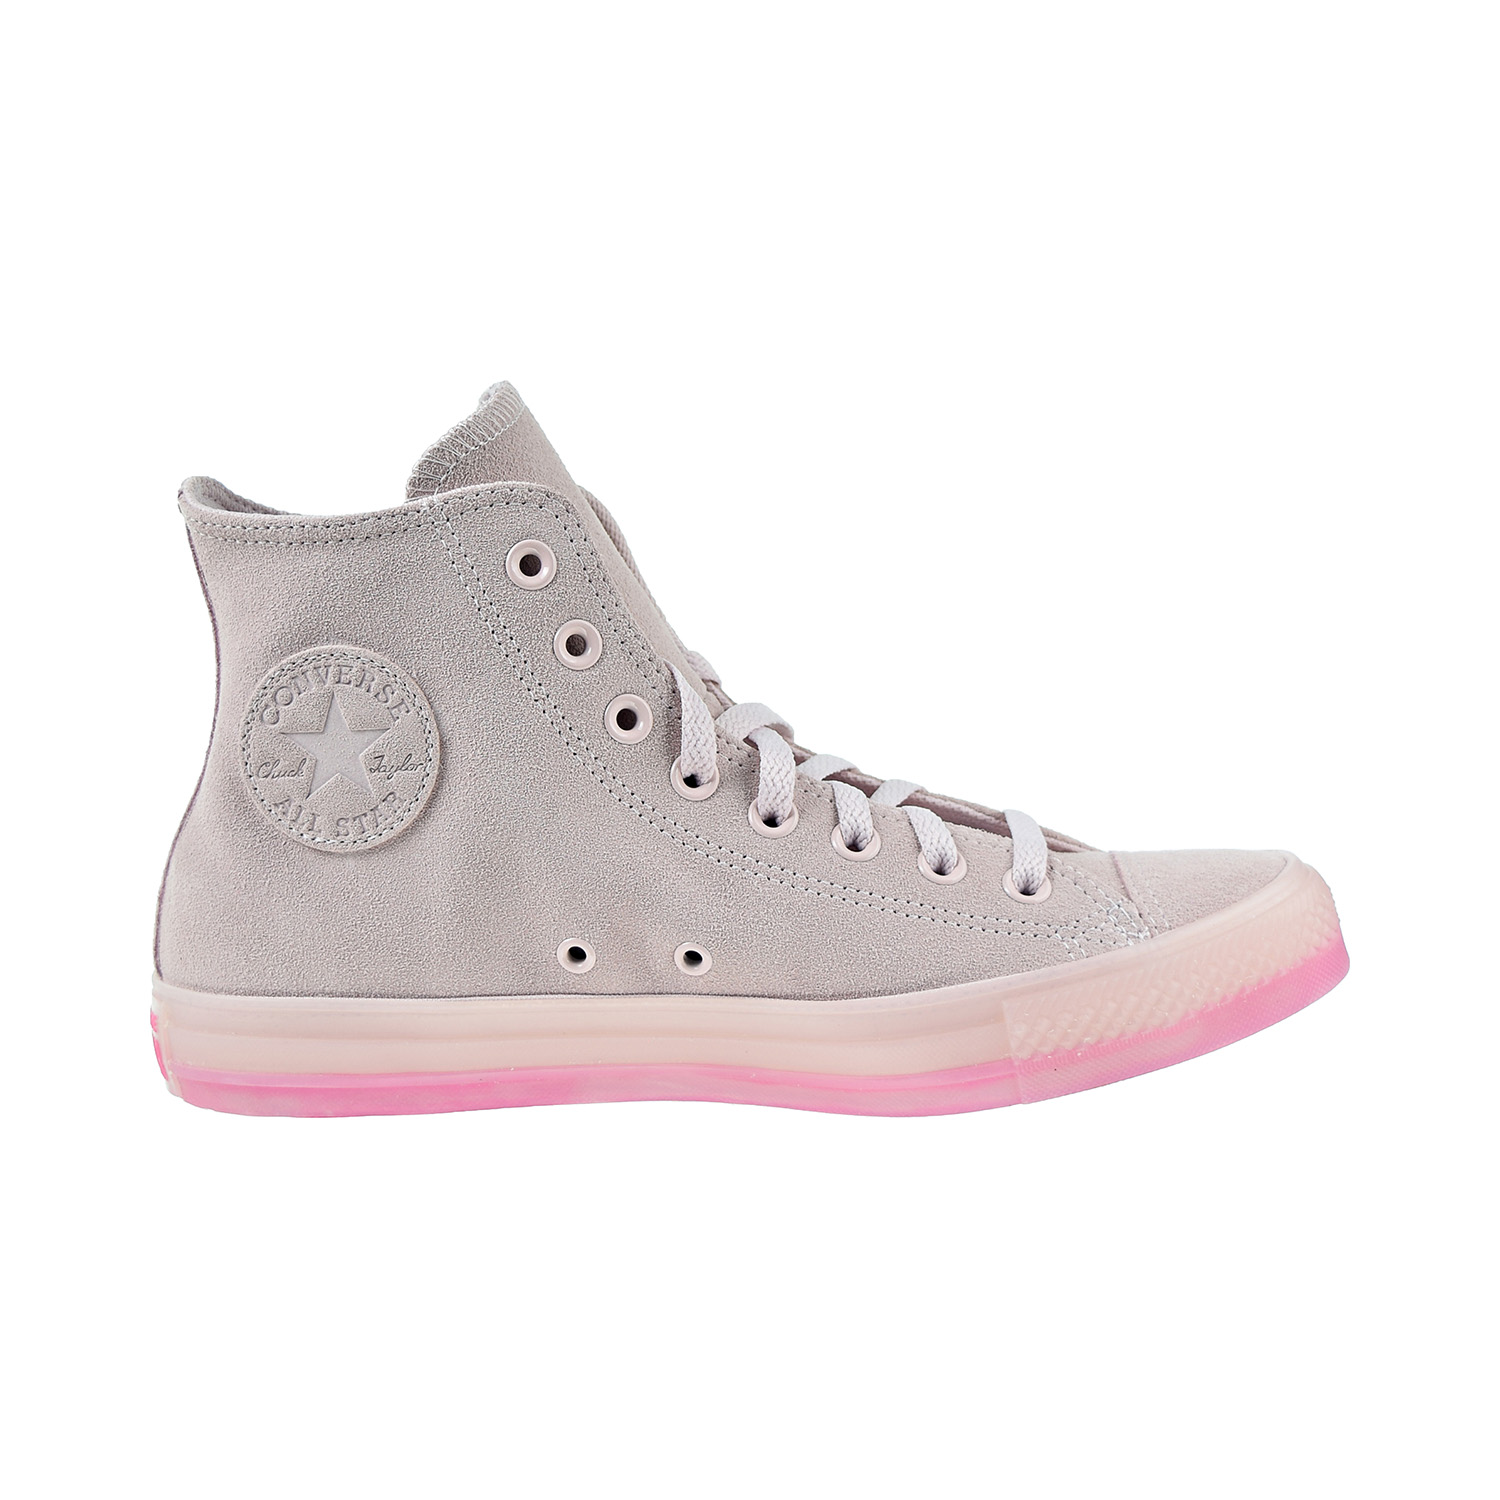 barely rose high top converse